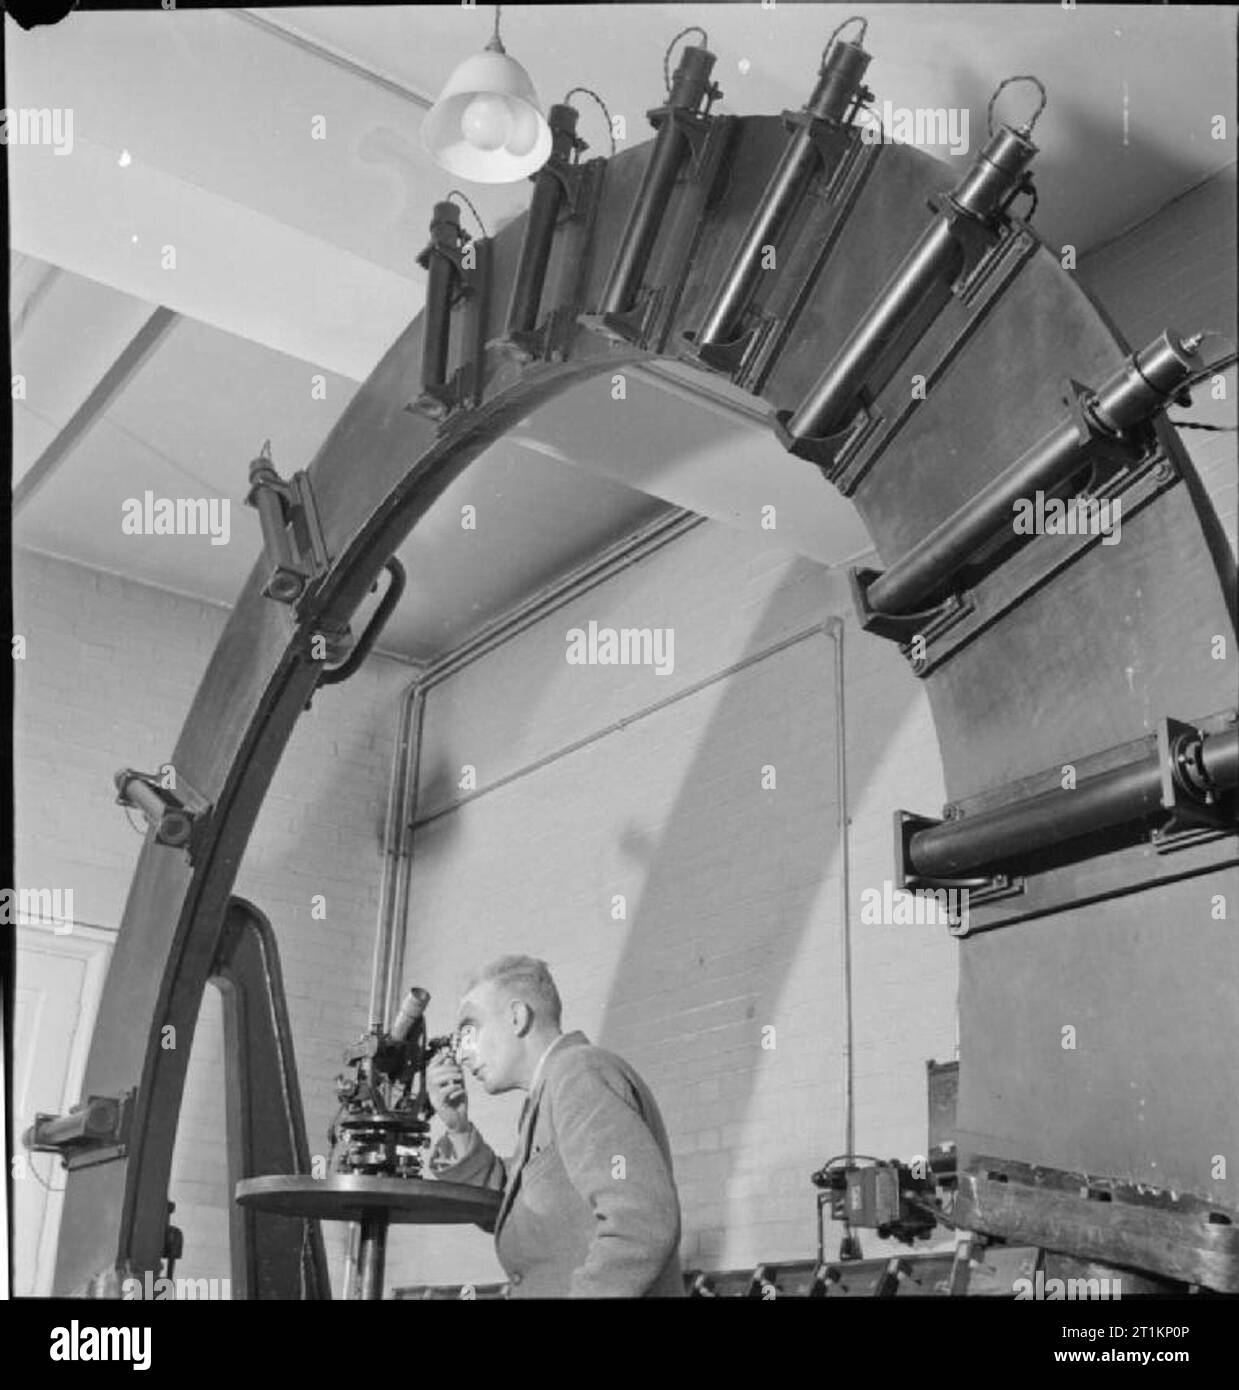 National Physical Laboratory- Science and Technology in Wartime, Teddington, Middlesex, England, UK, 1944 In the Optics Section of the Light Division at the National Physical Laboratory in Teddington, a scientist tests the angular scale of a sextant using a large wheel-like piece of apparatus, which is arranged vertically for economy of space. Stock Photo